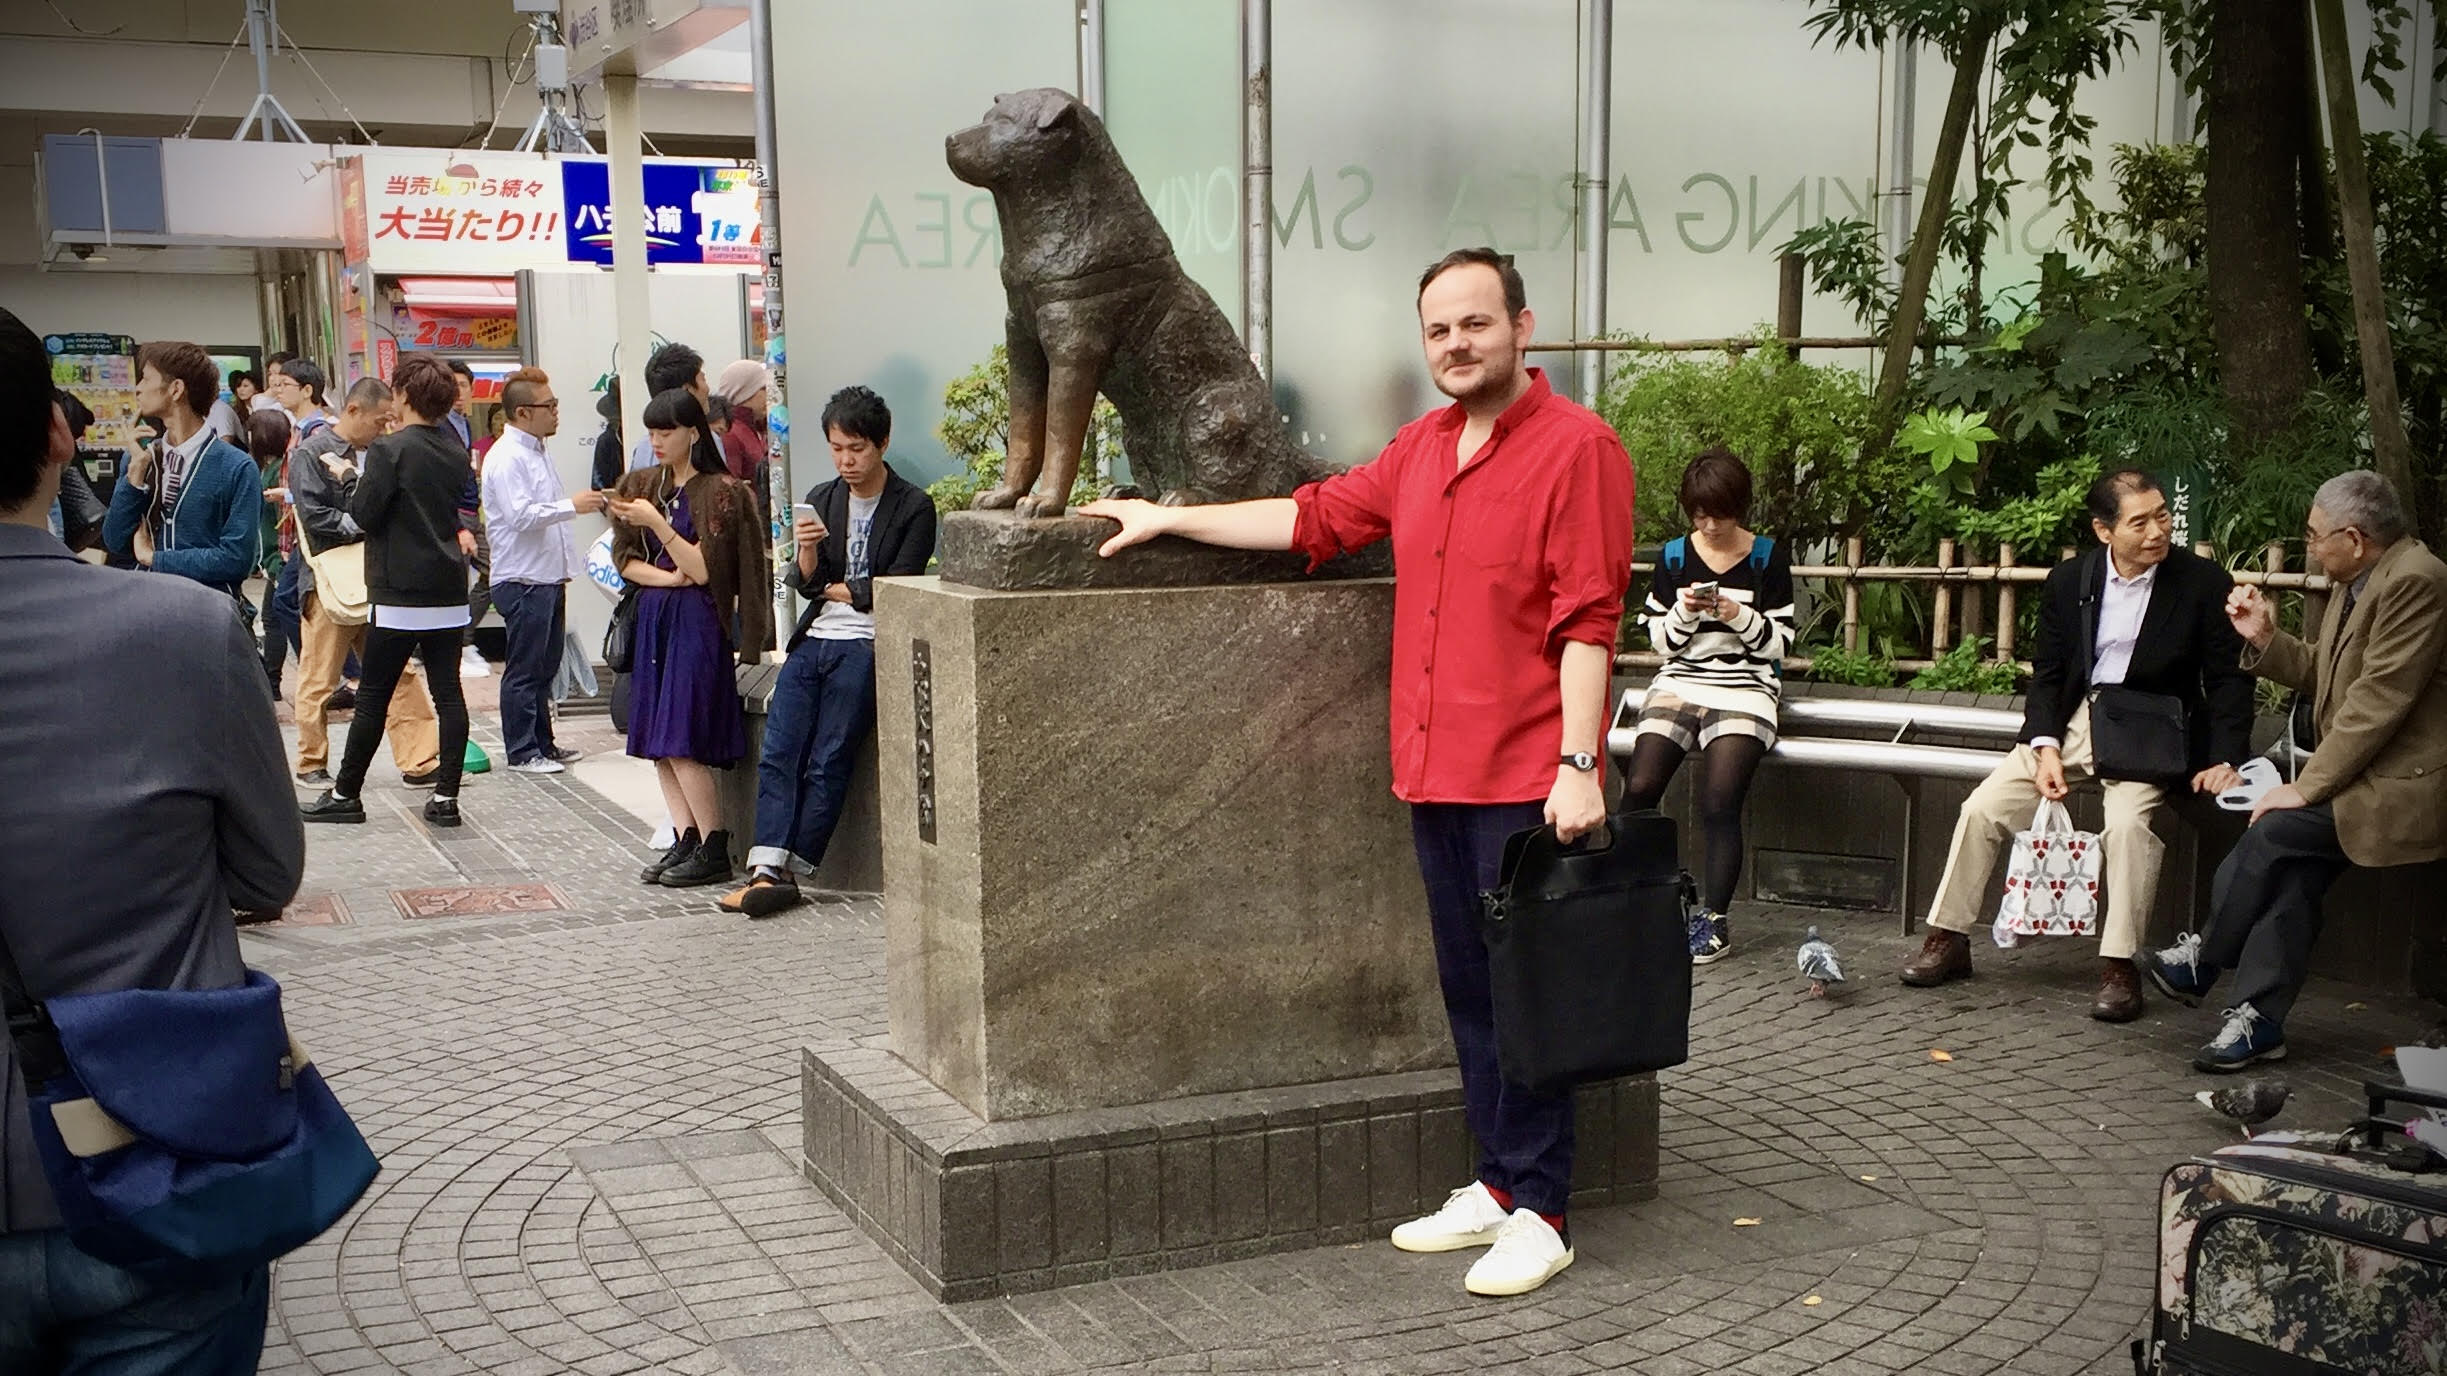 Paul aka The Conservative in Tokyo in front of the Hachiku statue